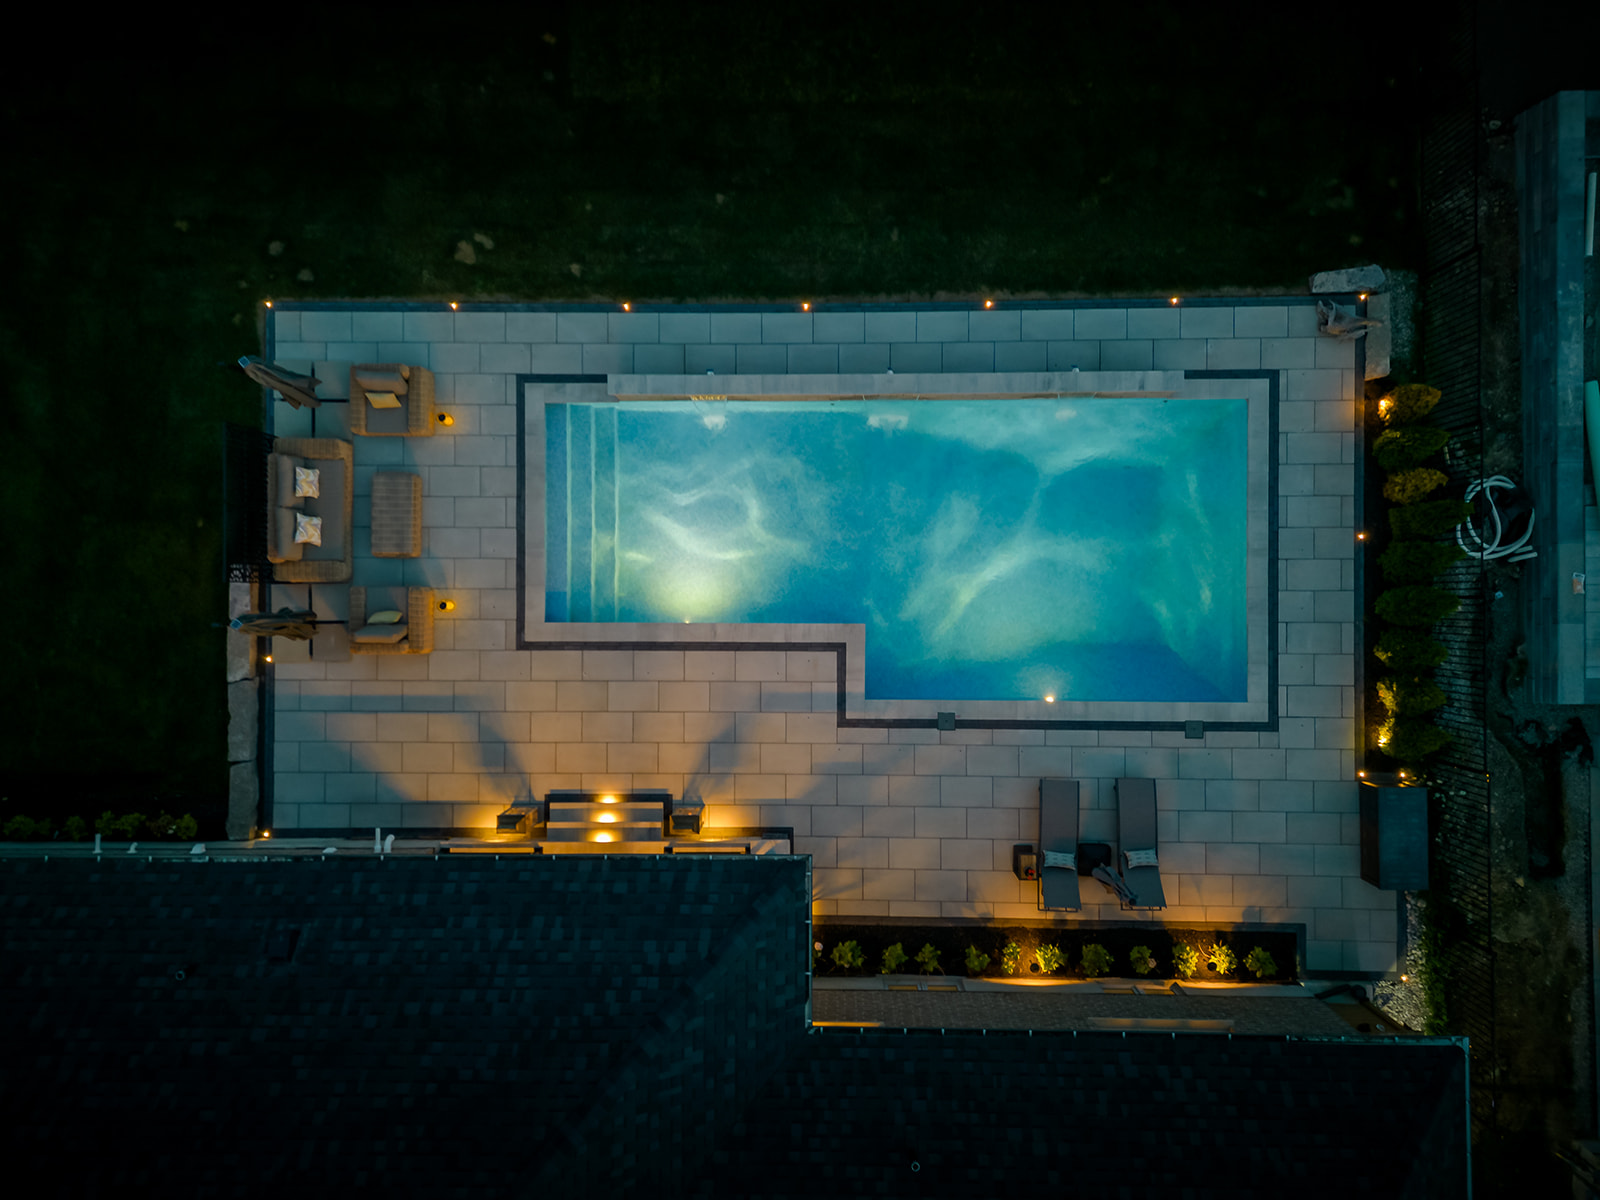 Top down view with lights on in the inground pool.